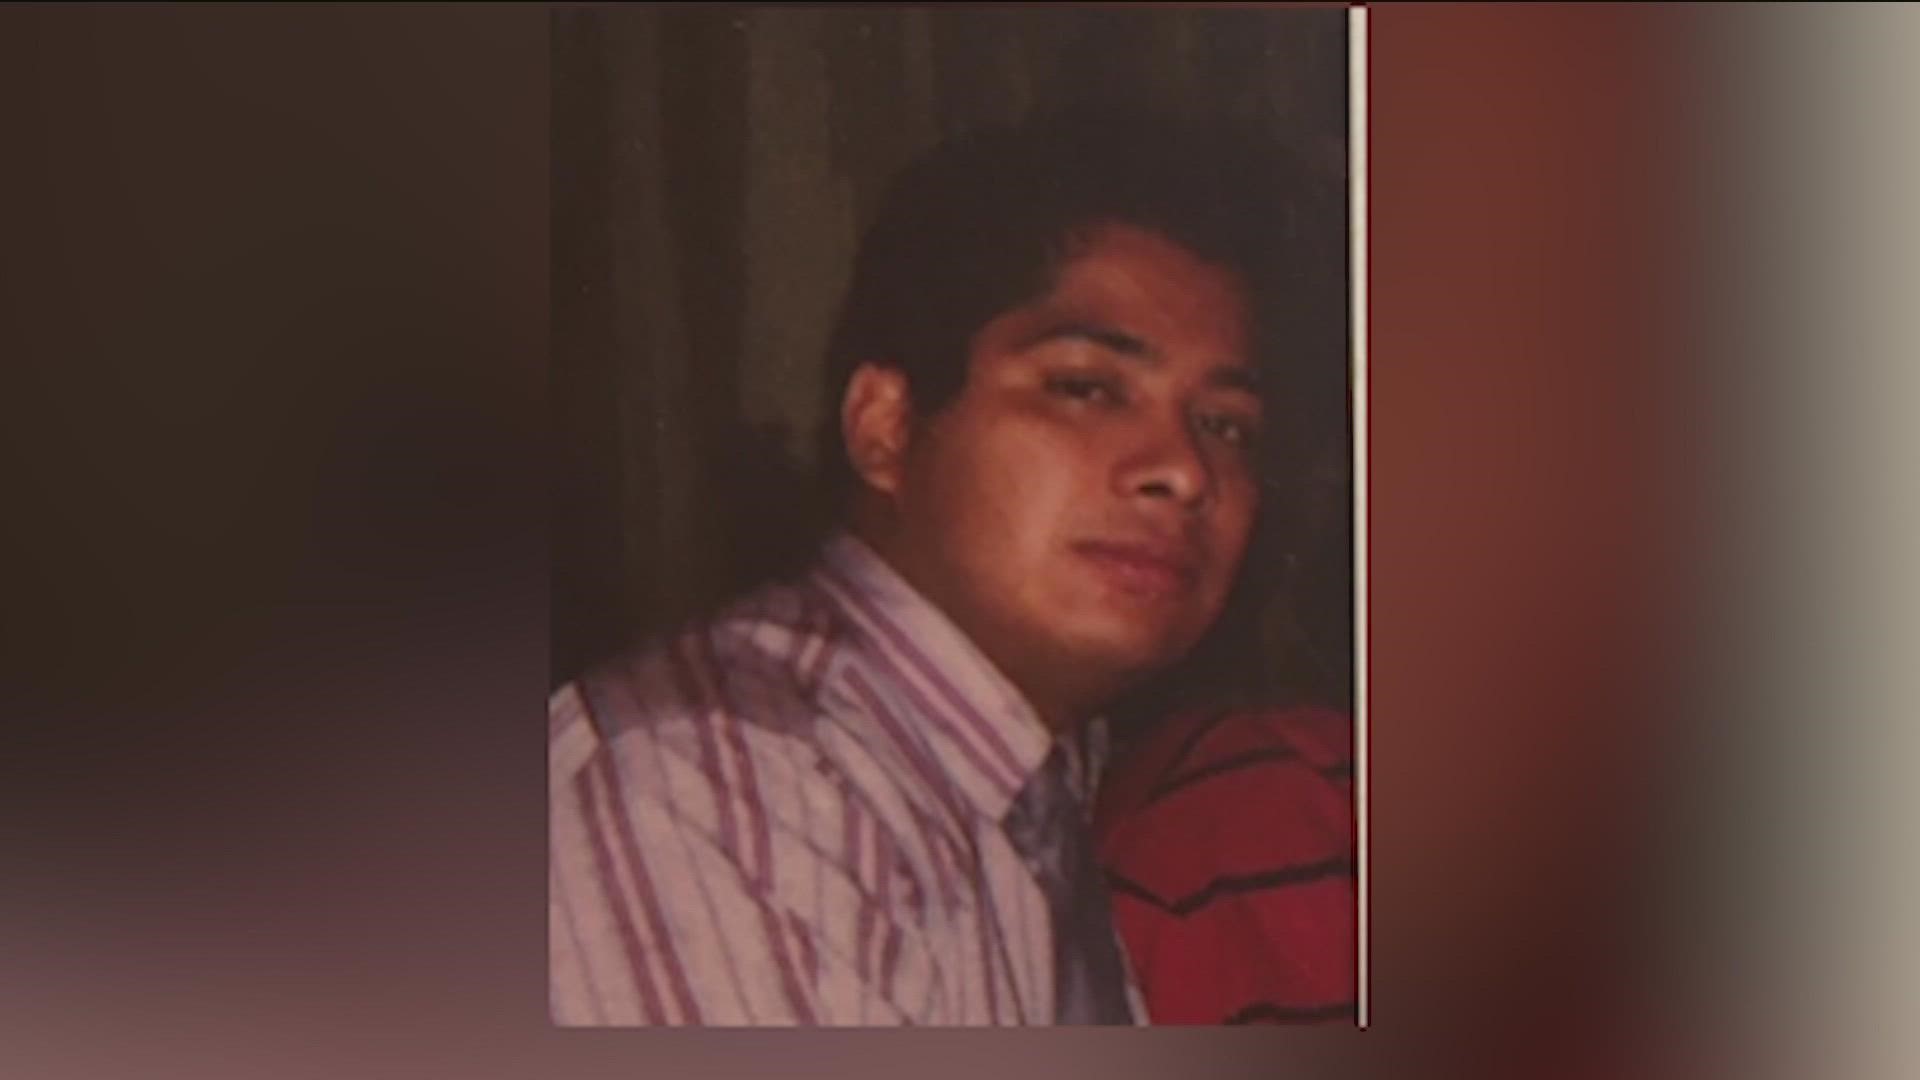 Stephen Arevalo was murdered on Thanksgiving, 27 years ago.